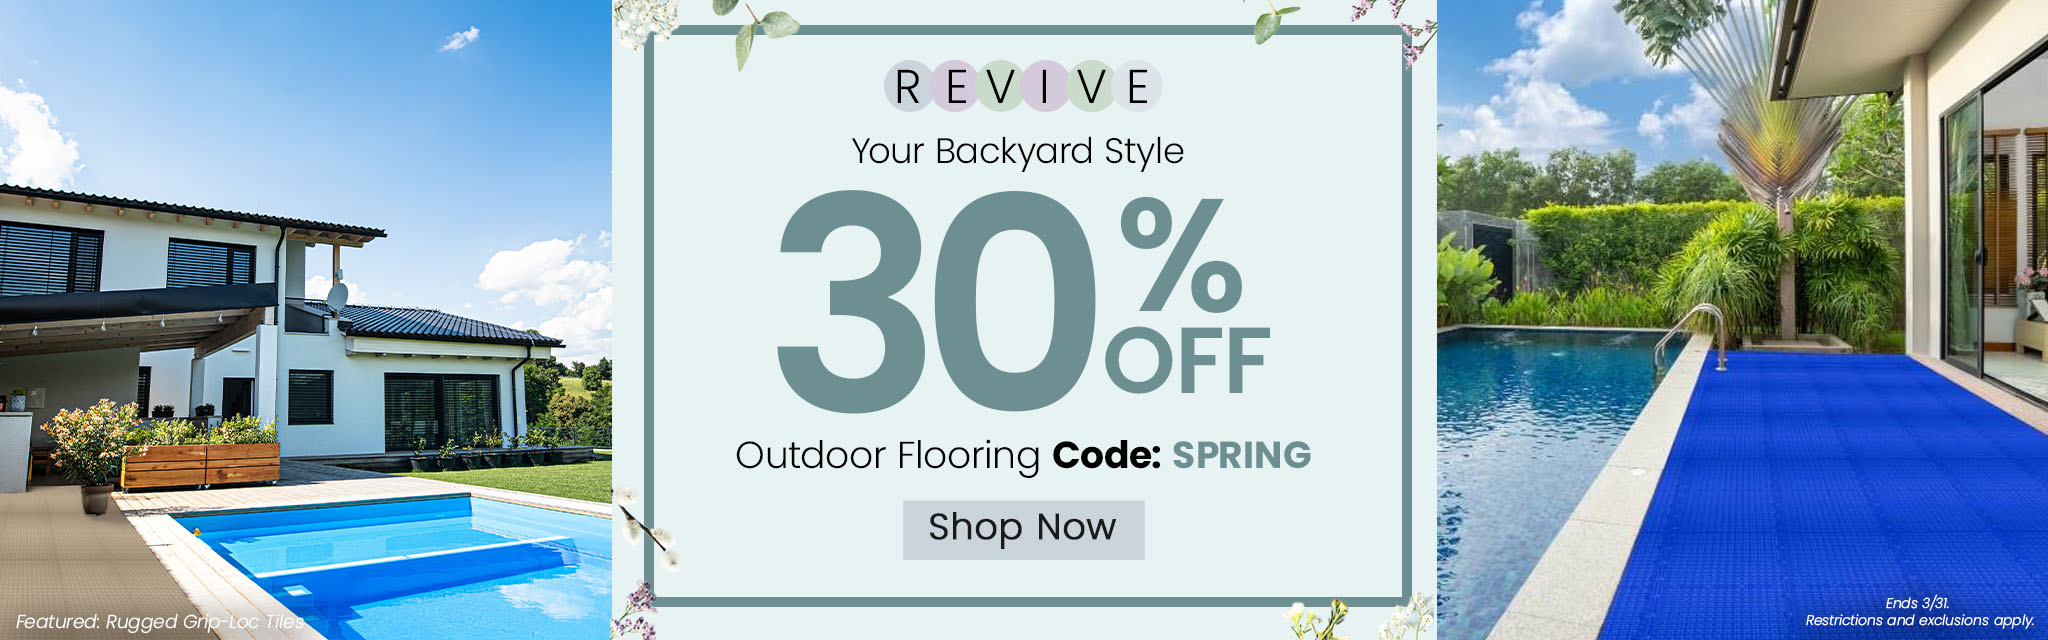 Revive Your Backyard Style | 30% Off Outdoor Flooring With Code: SPRING | Shop Now | Ends 3/31. Restrictions and exclusions apply.